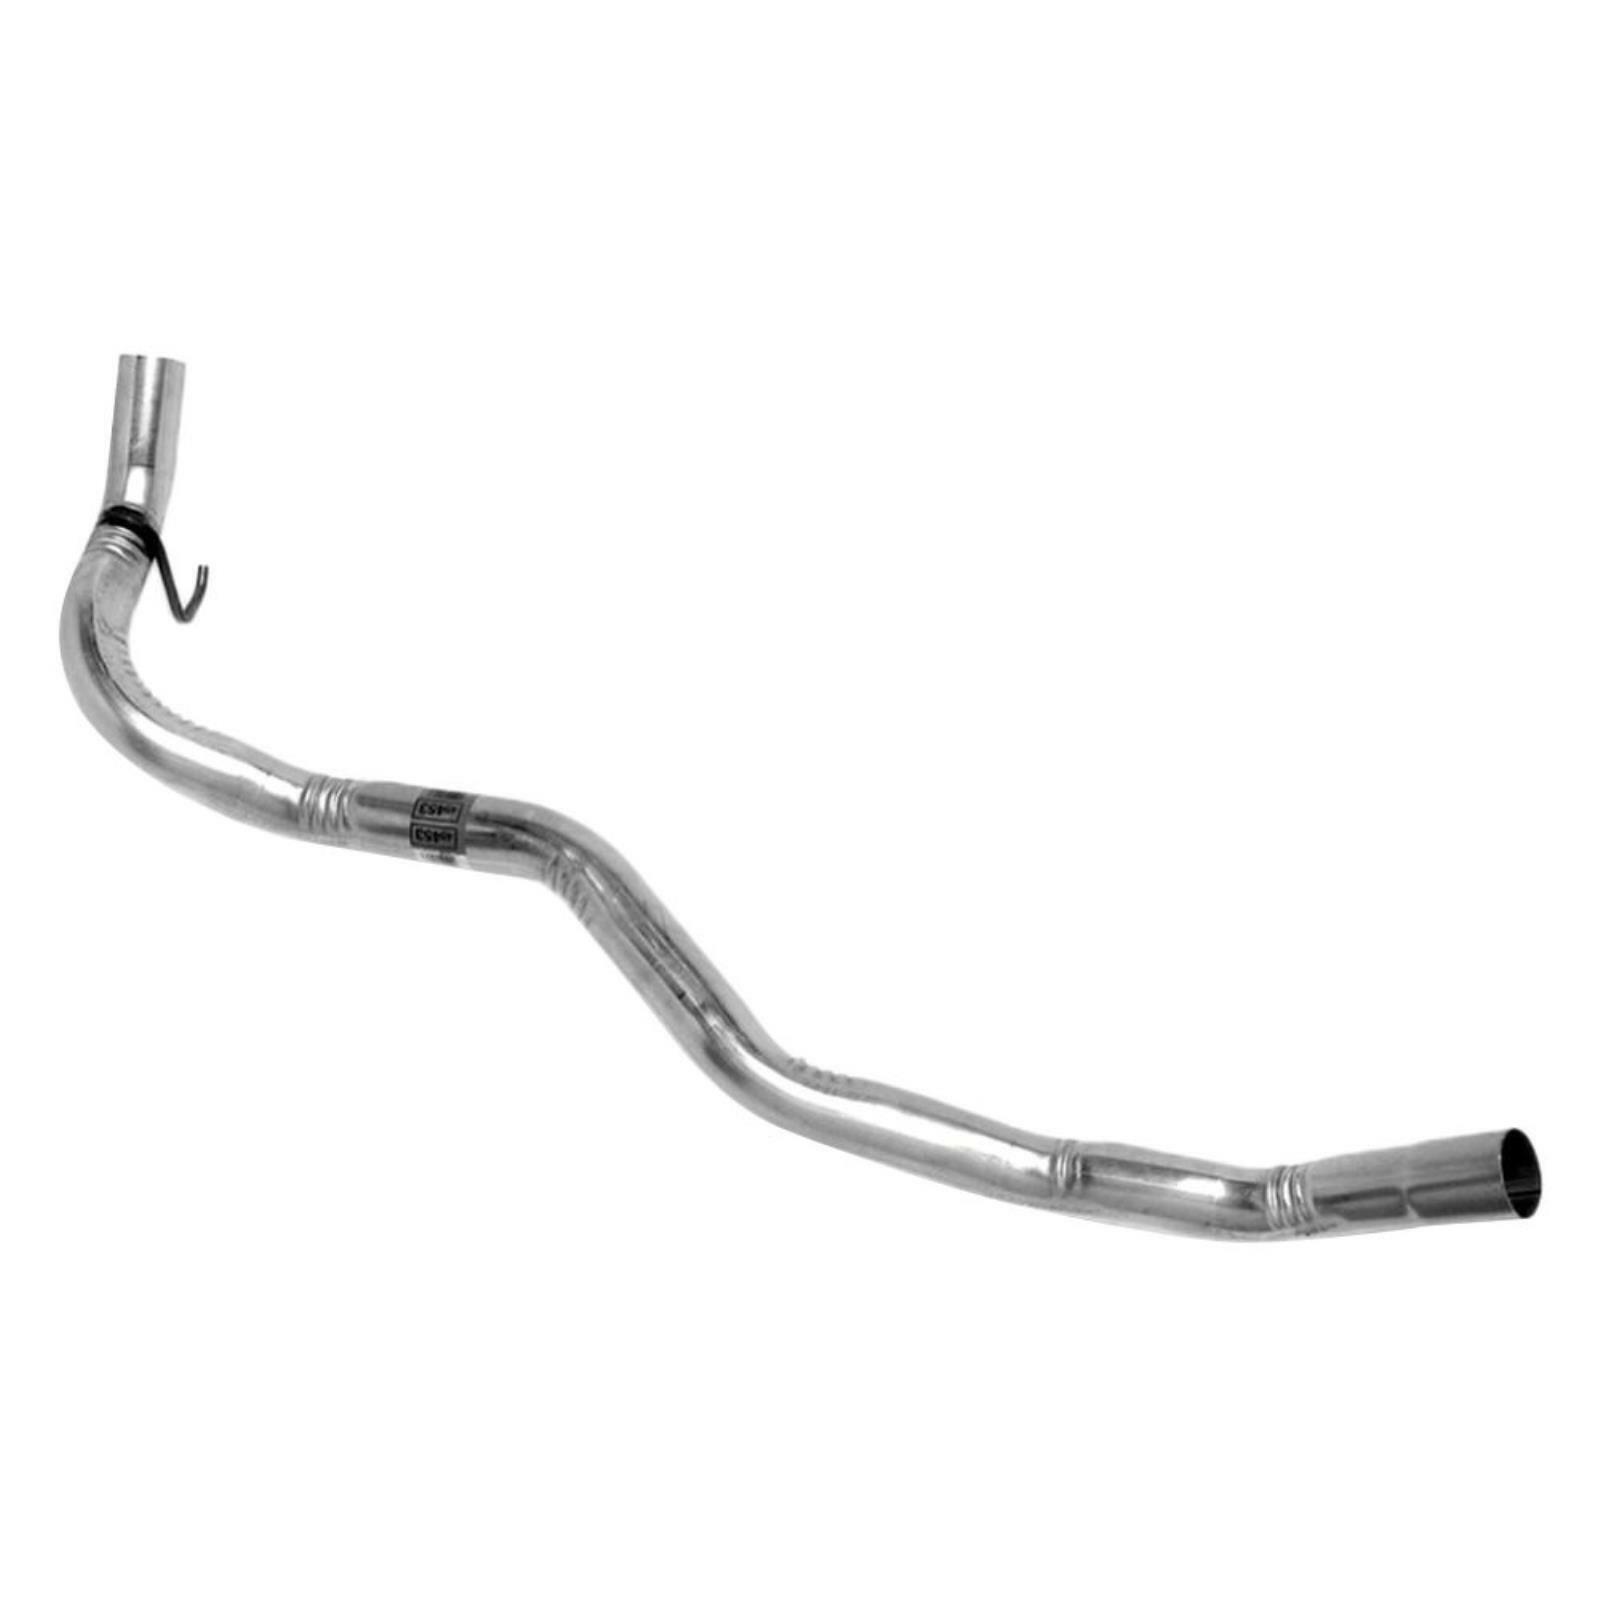 Exhaust Tailpipe Made of Aluminized Steel Fits 1994-2000 Chevy S-10 Pickup